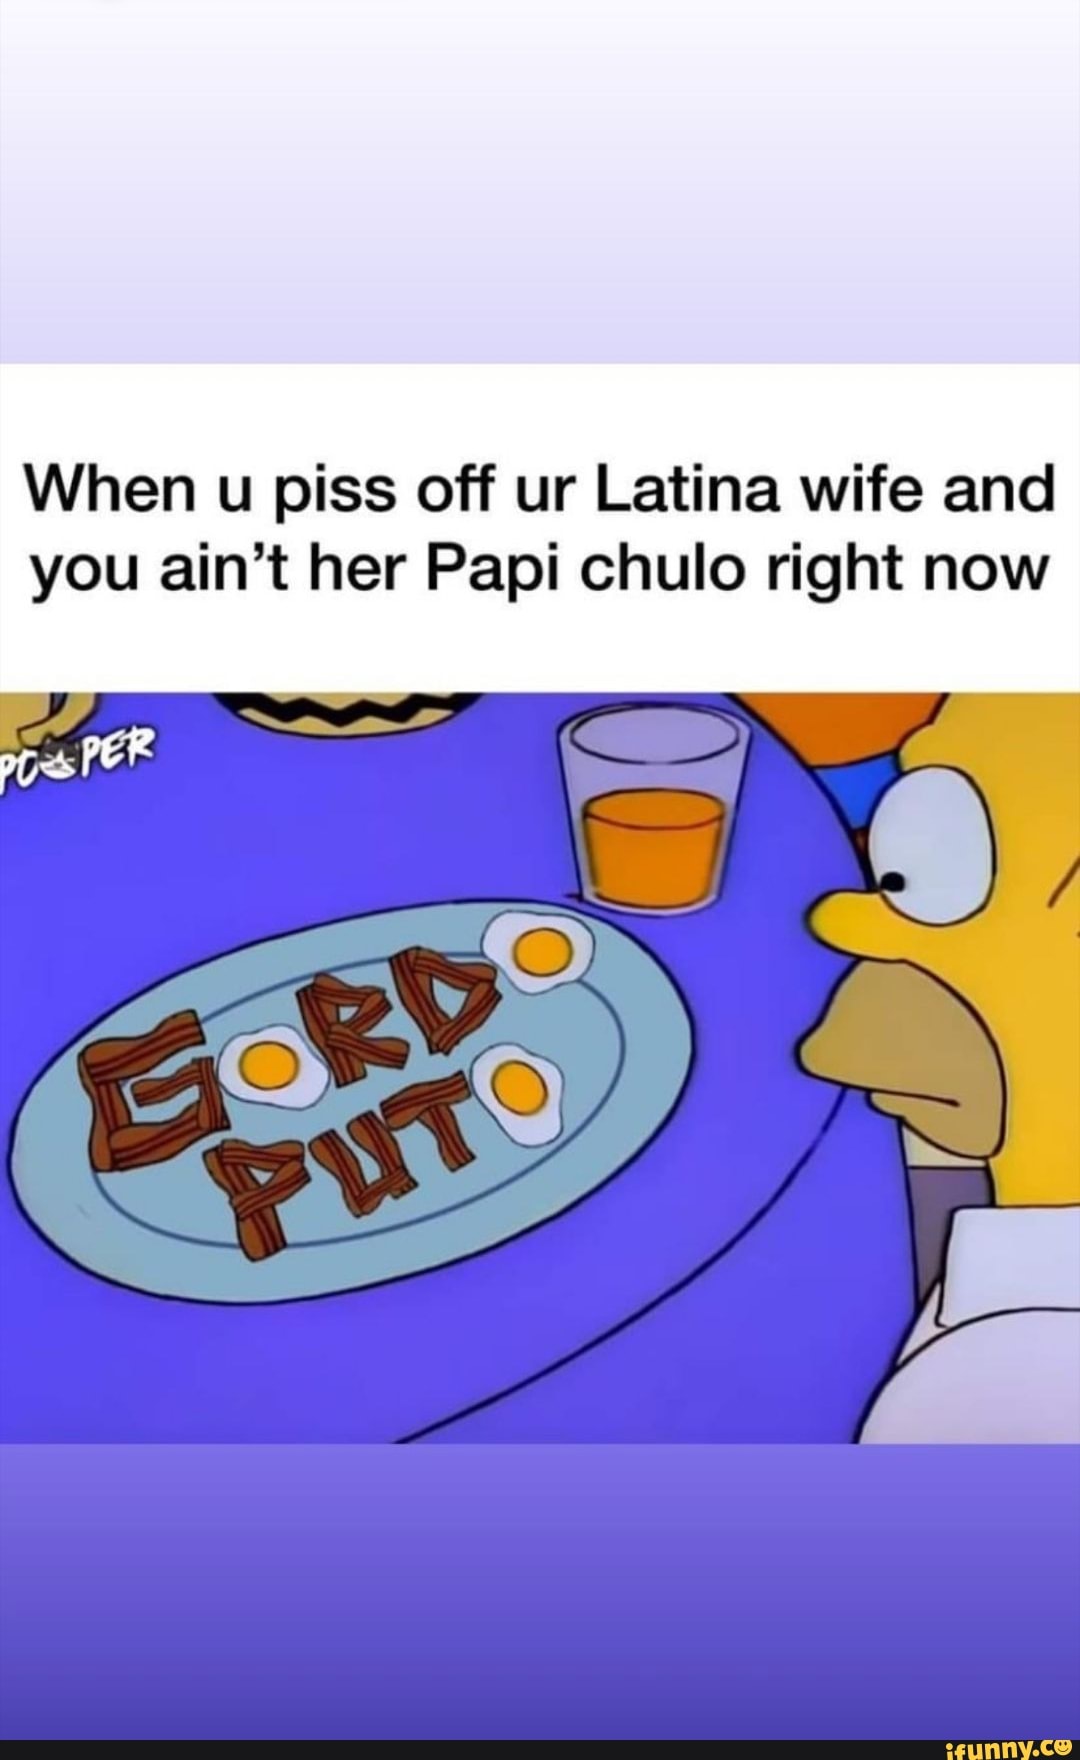 When u piss off ur Latina wife and you